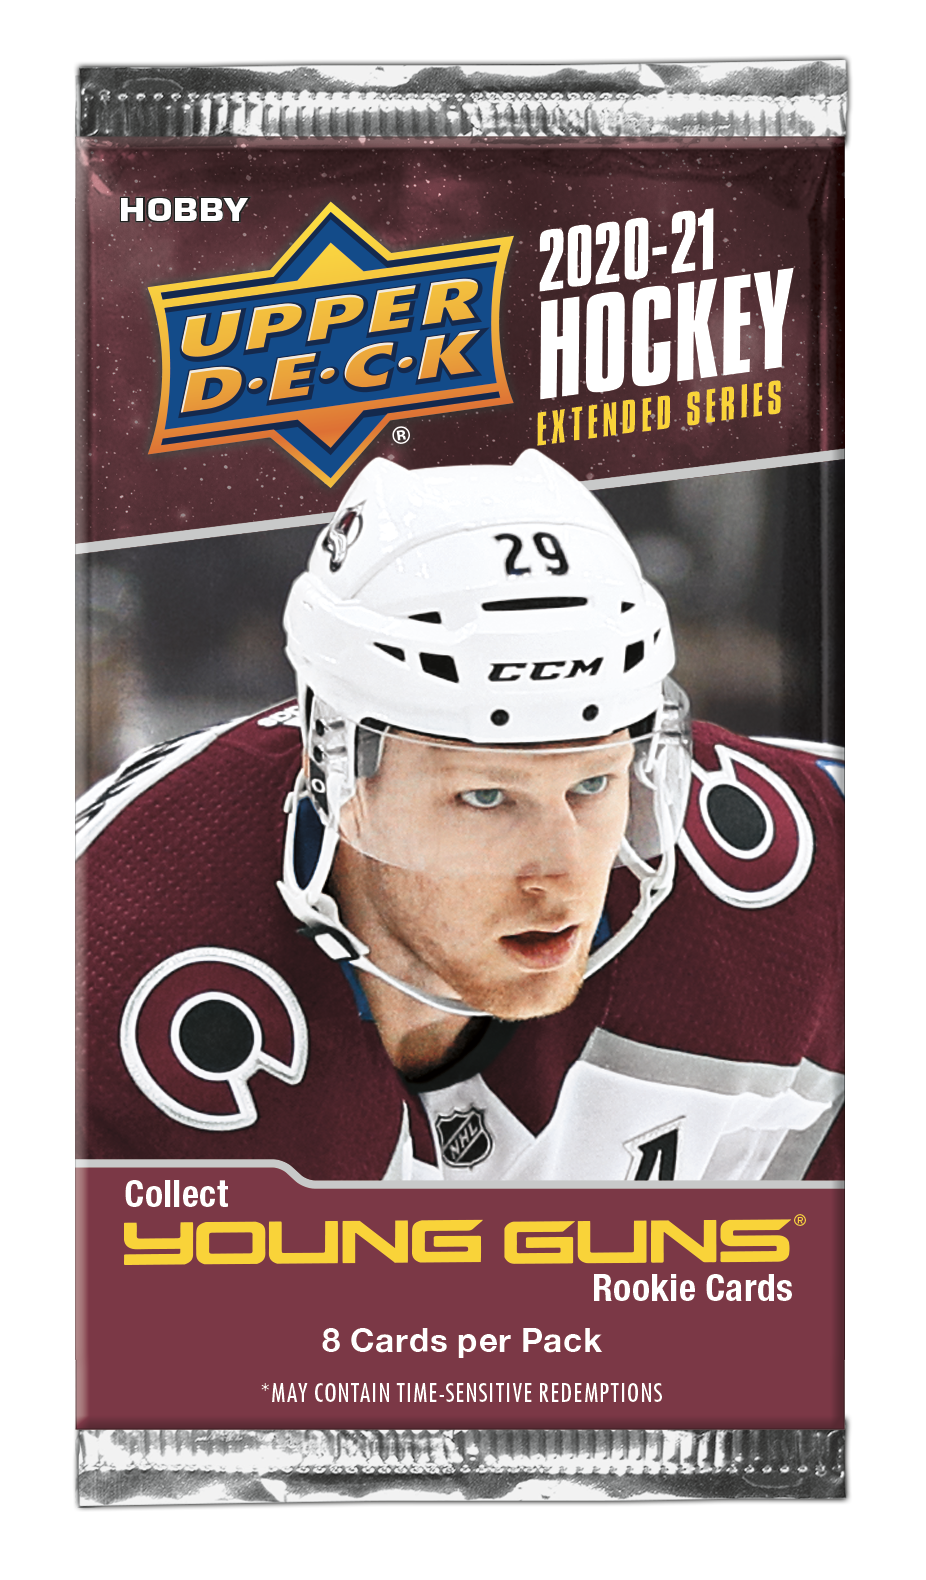 2020-21 Upper Deck The Cup Hockey Hobby Box Case (Case of 6 Boxes)